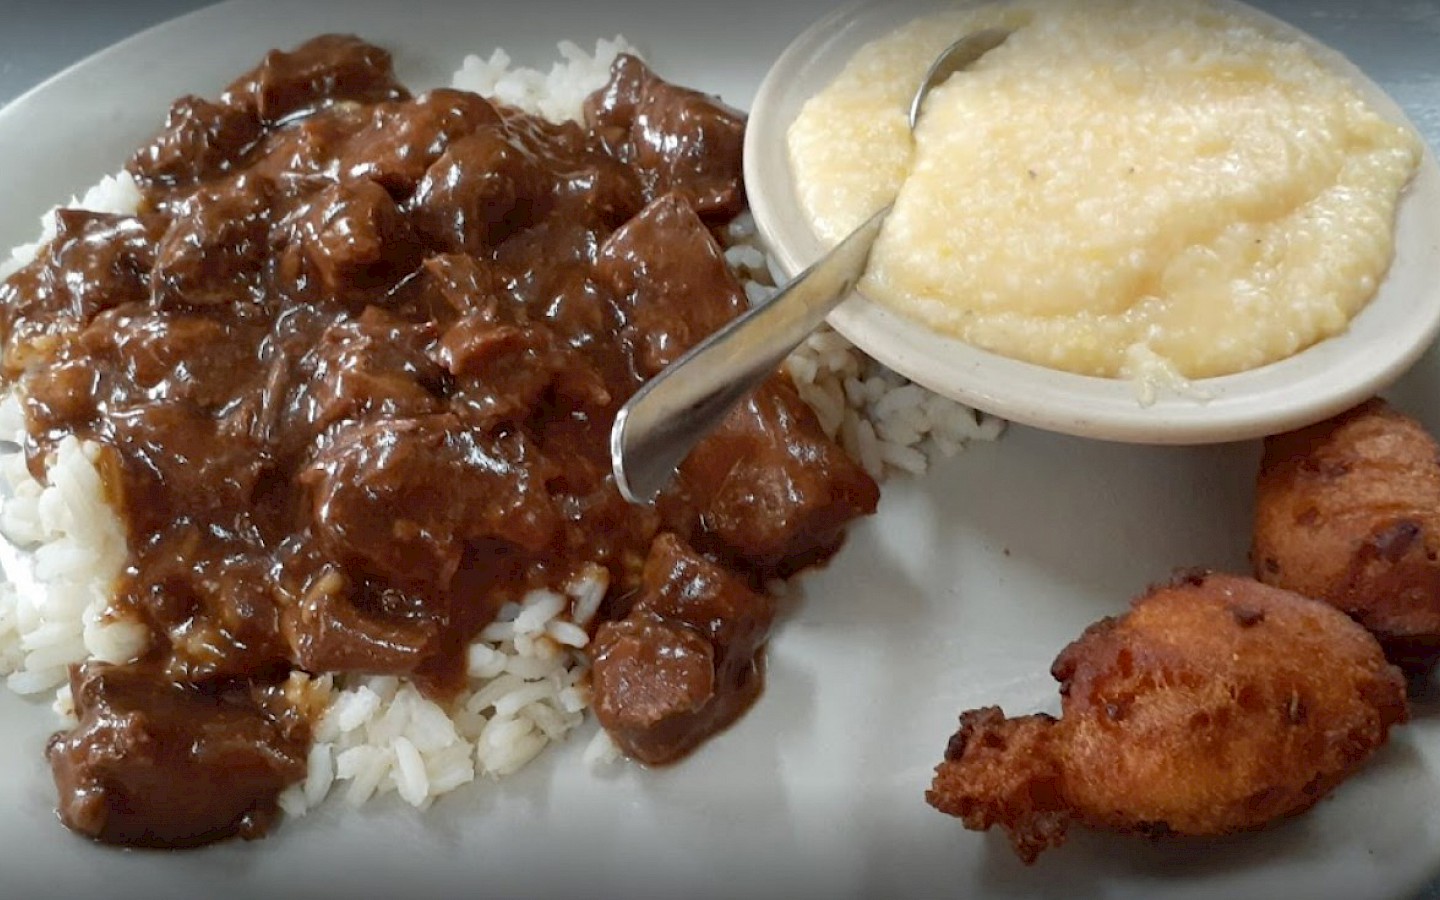 beef tips in gravy on rice, a bowl of cheese grits and hushpuppies